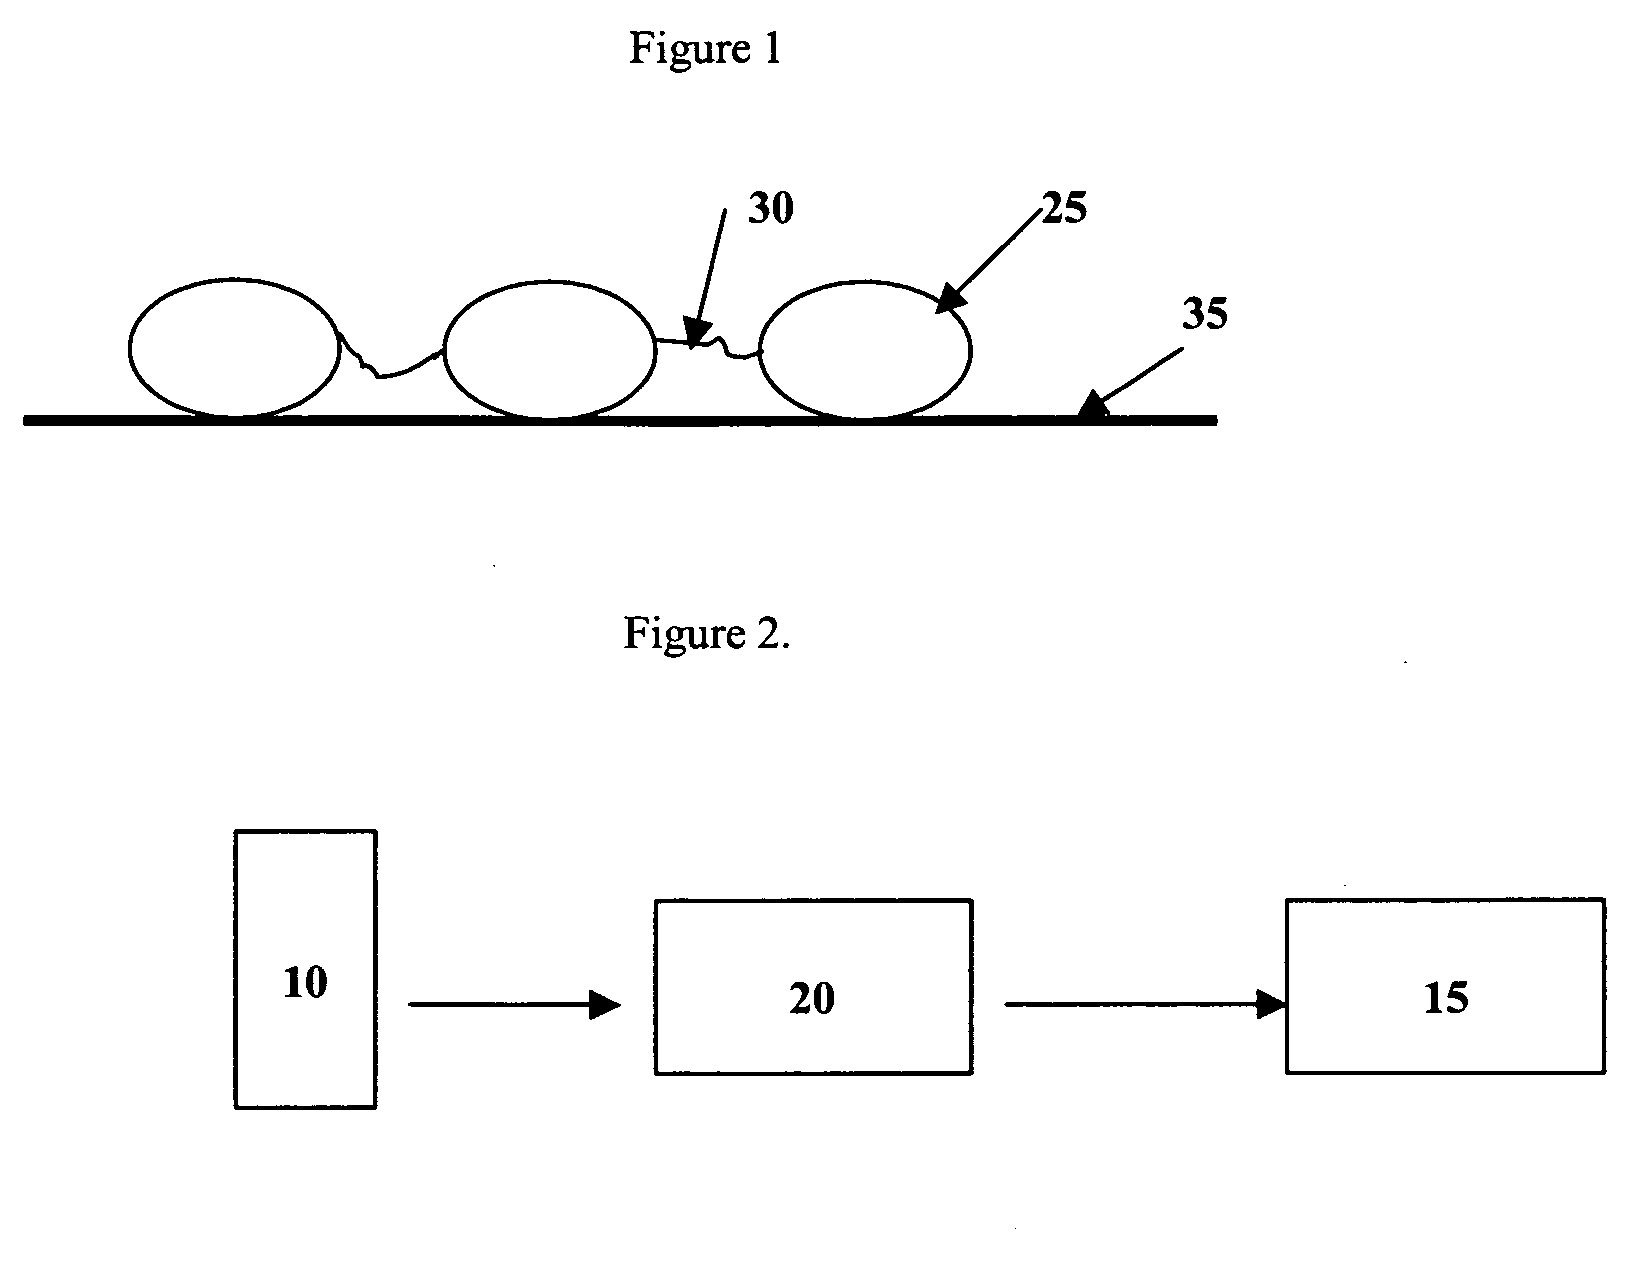 Method for imaging an array of microspheres